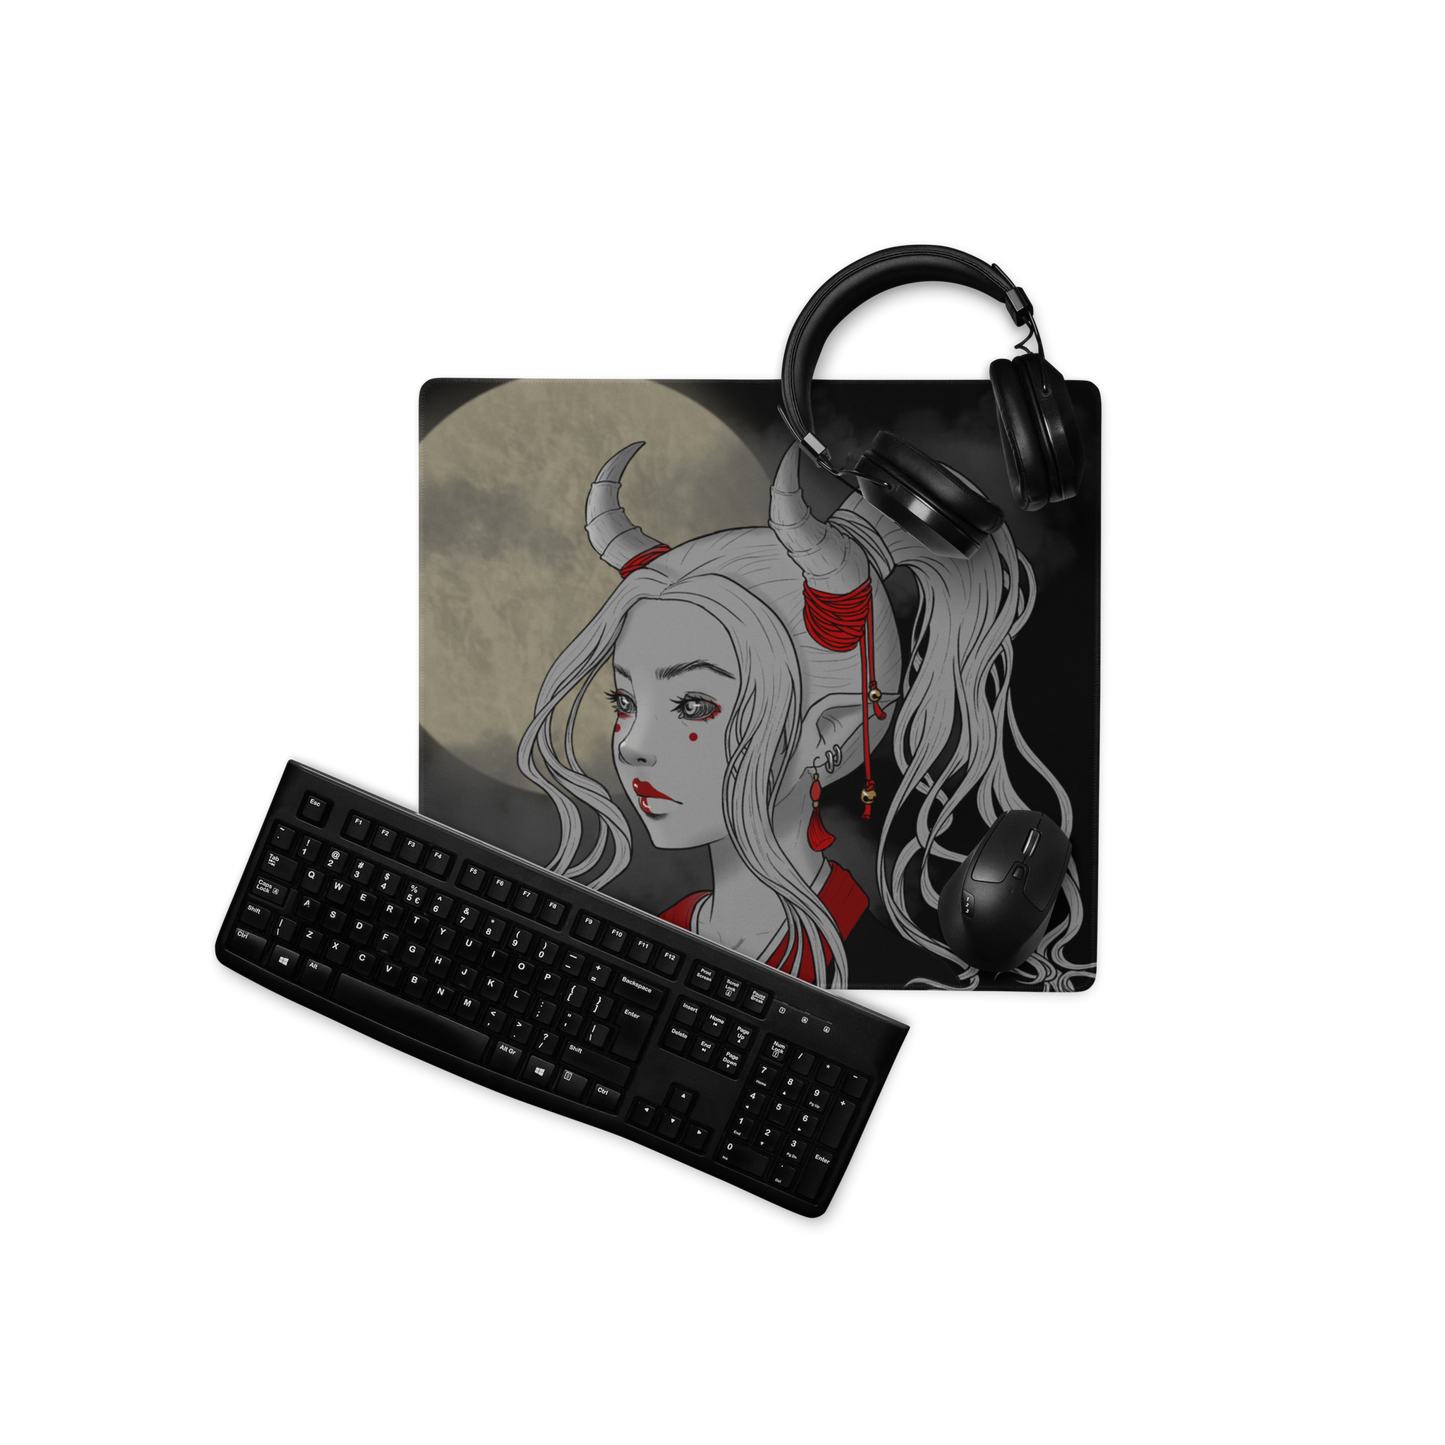 Oni Girl by Leticia Lobato - Gaming mouse pad